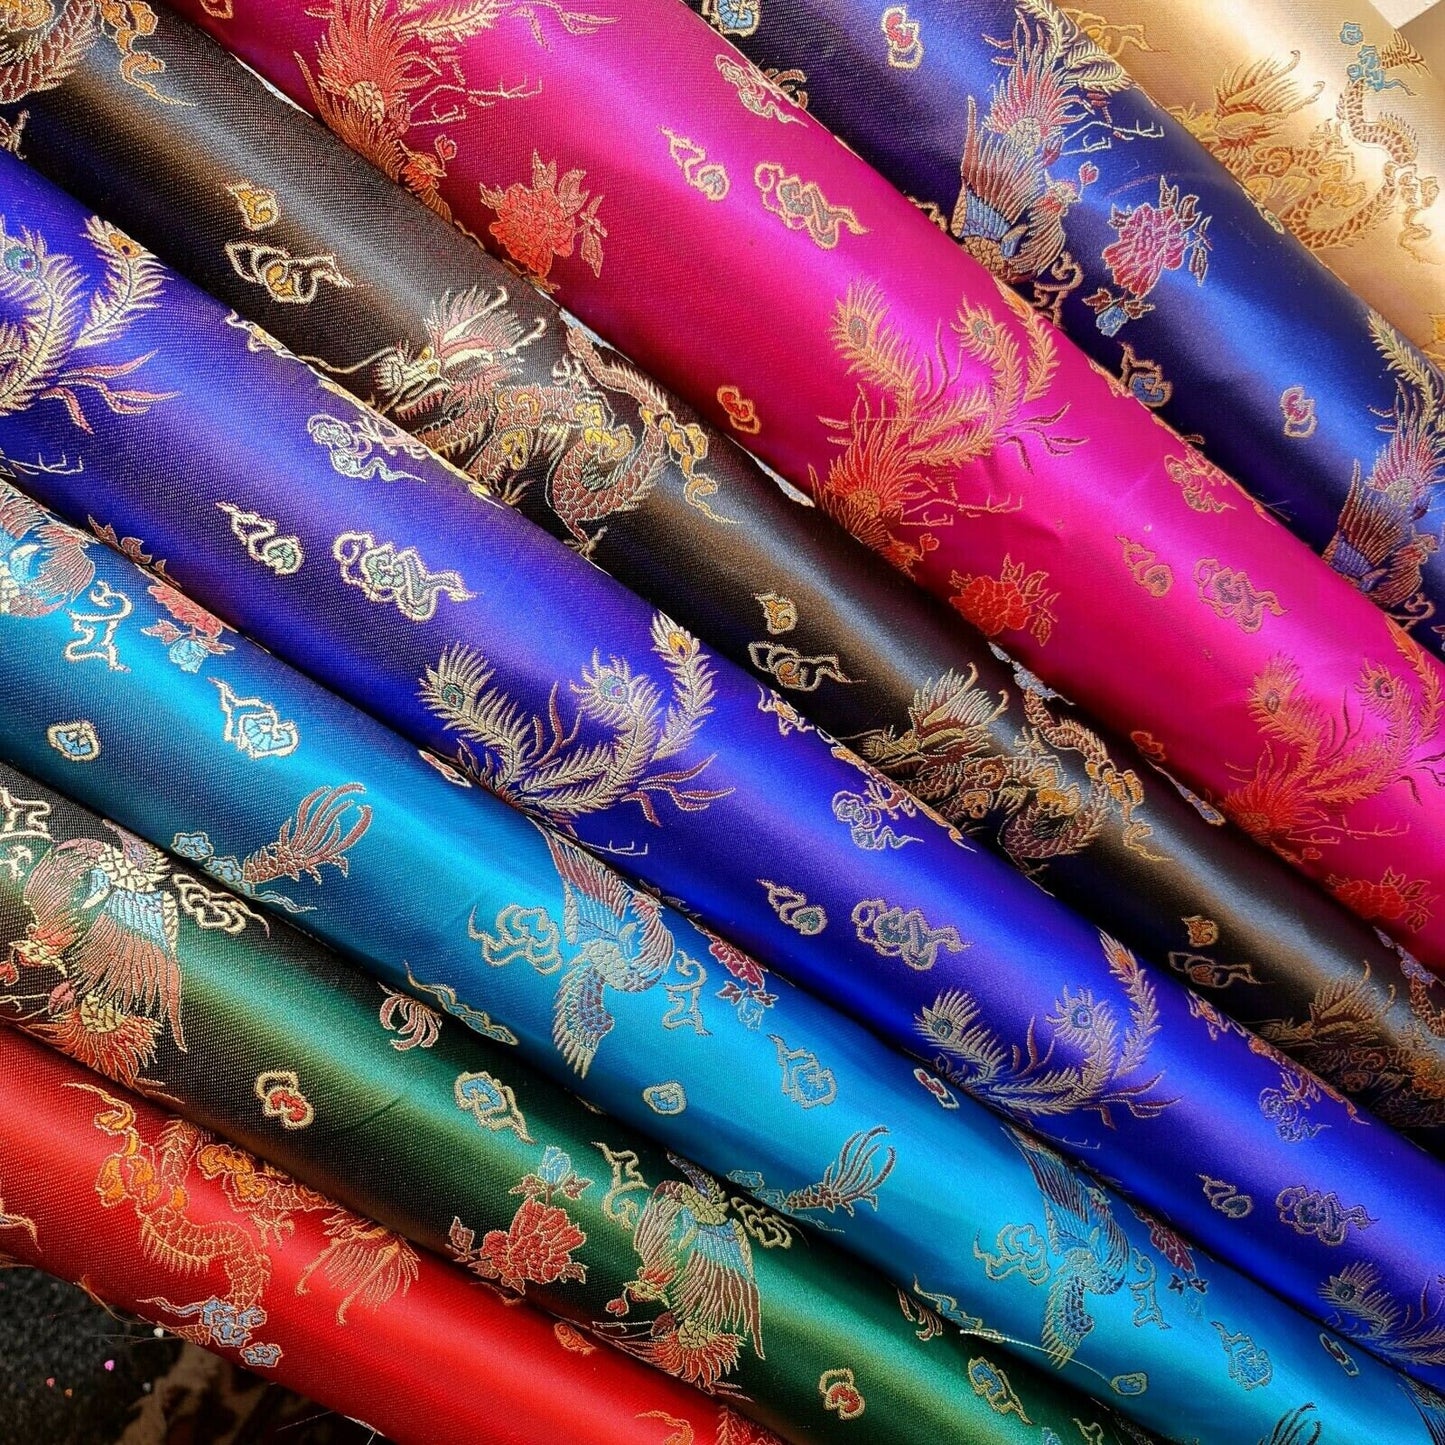 Traditional Chinese Embroidered Brocade Poly Silky Satin Oriental Dragon Print By the Meter (Gold)